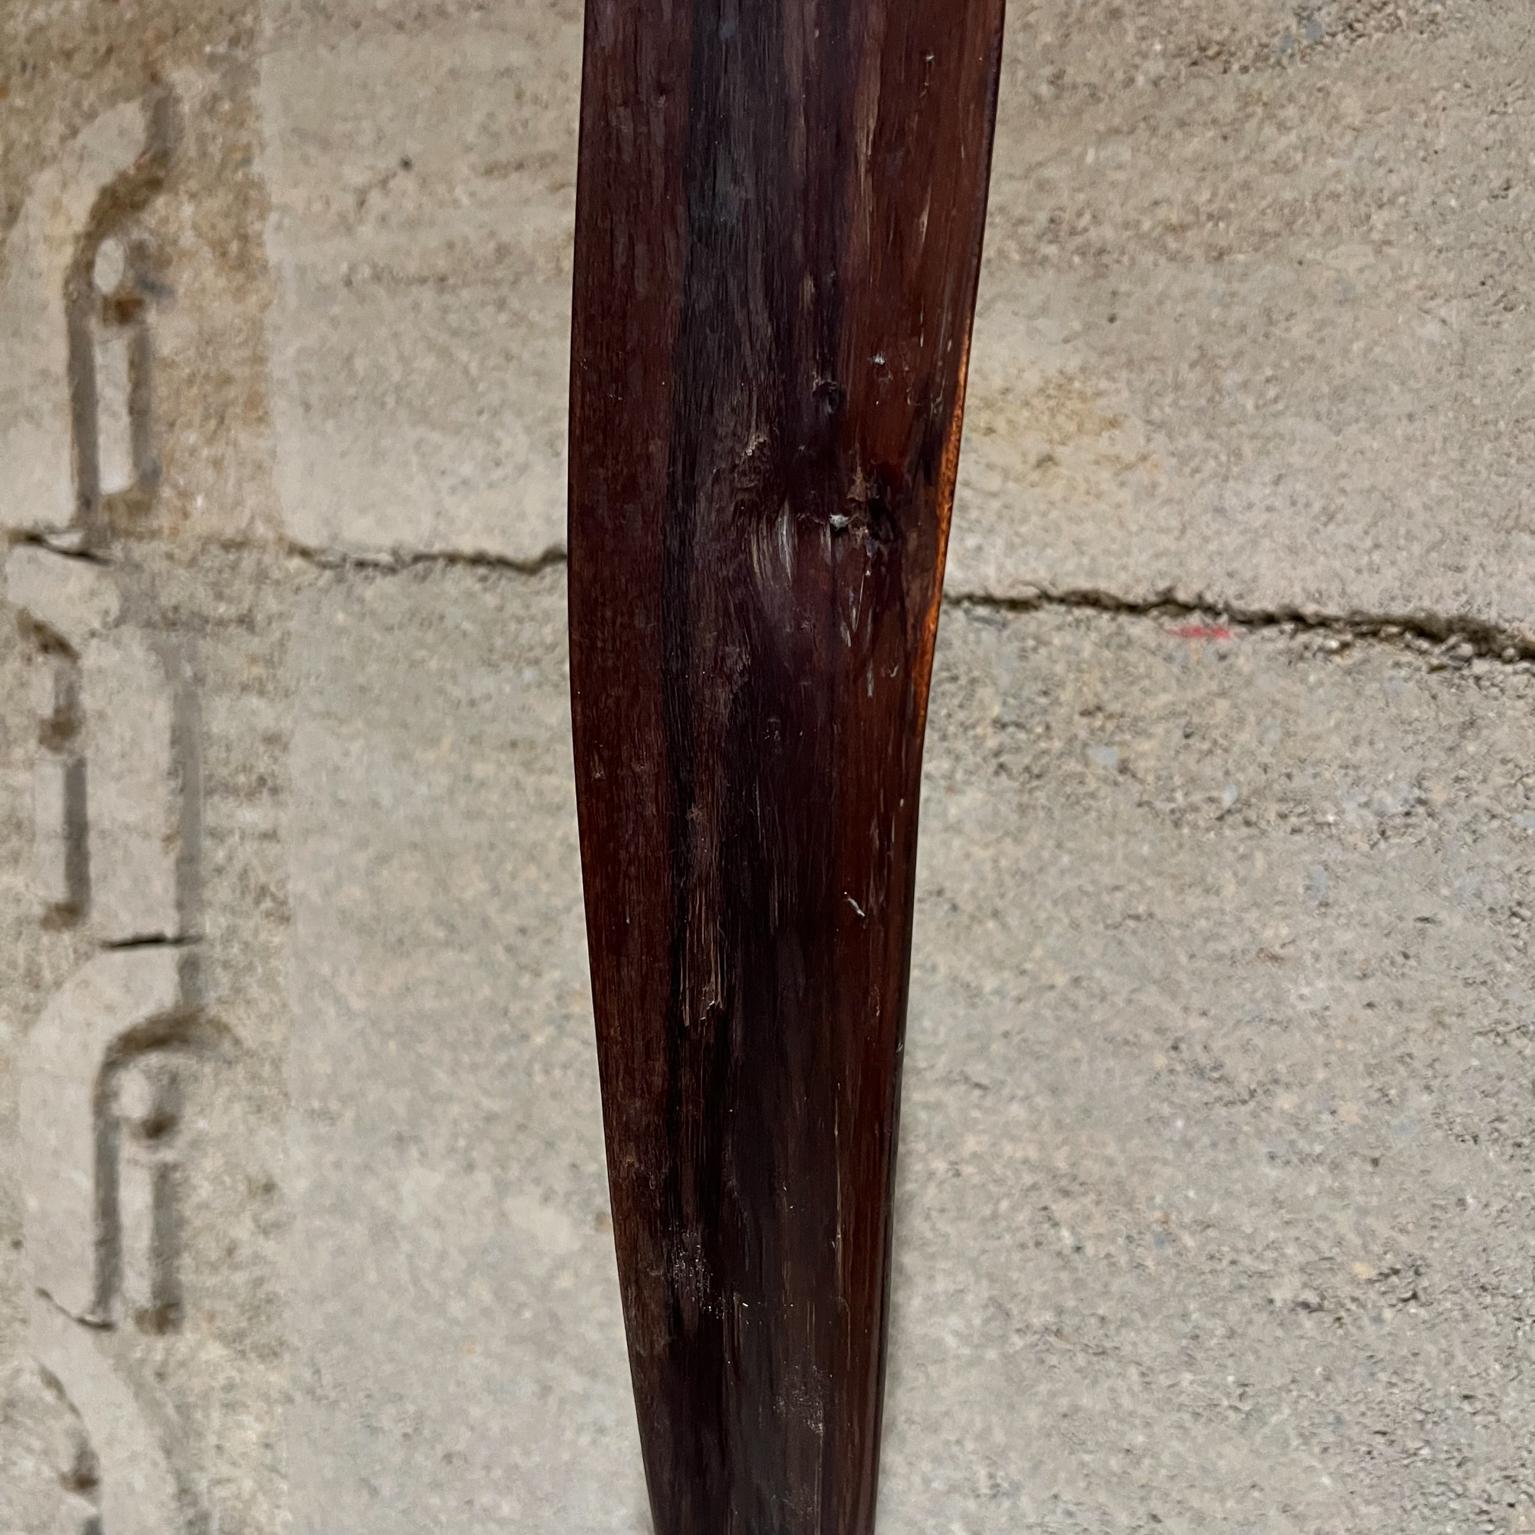  Mexican Exotic Ironwood Carved Modern Sculpture Palo Fiero Wood In Good Condition For Sale In Chula Vista, CA